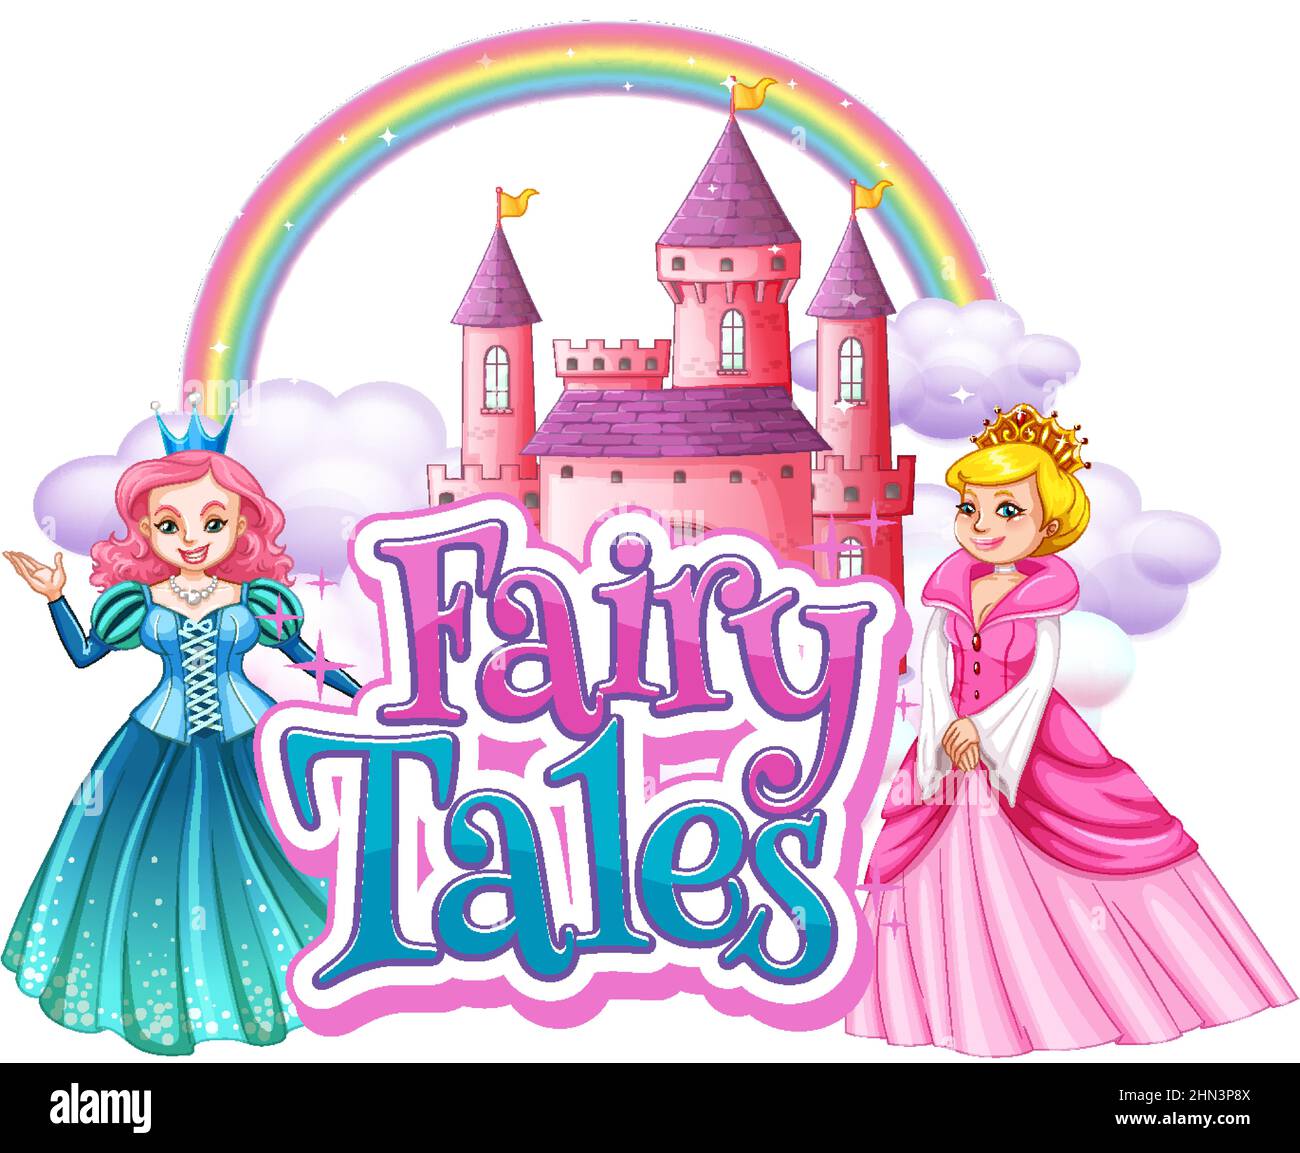 Fairy Tales word logo with two princesses in cartoon style illustration Stock Vector